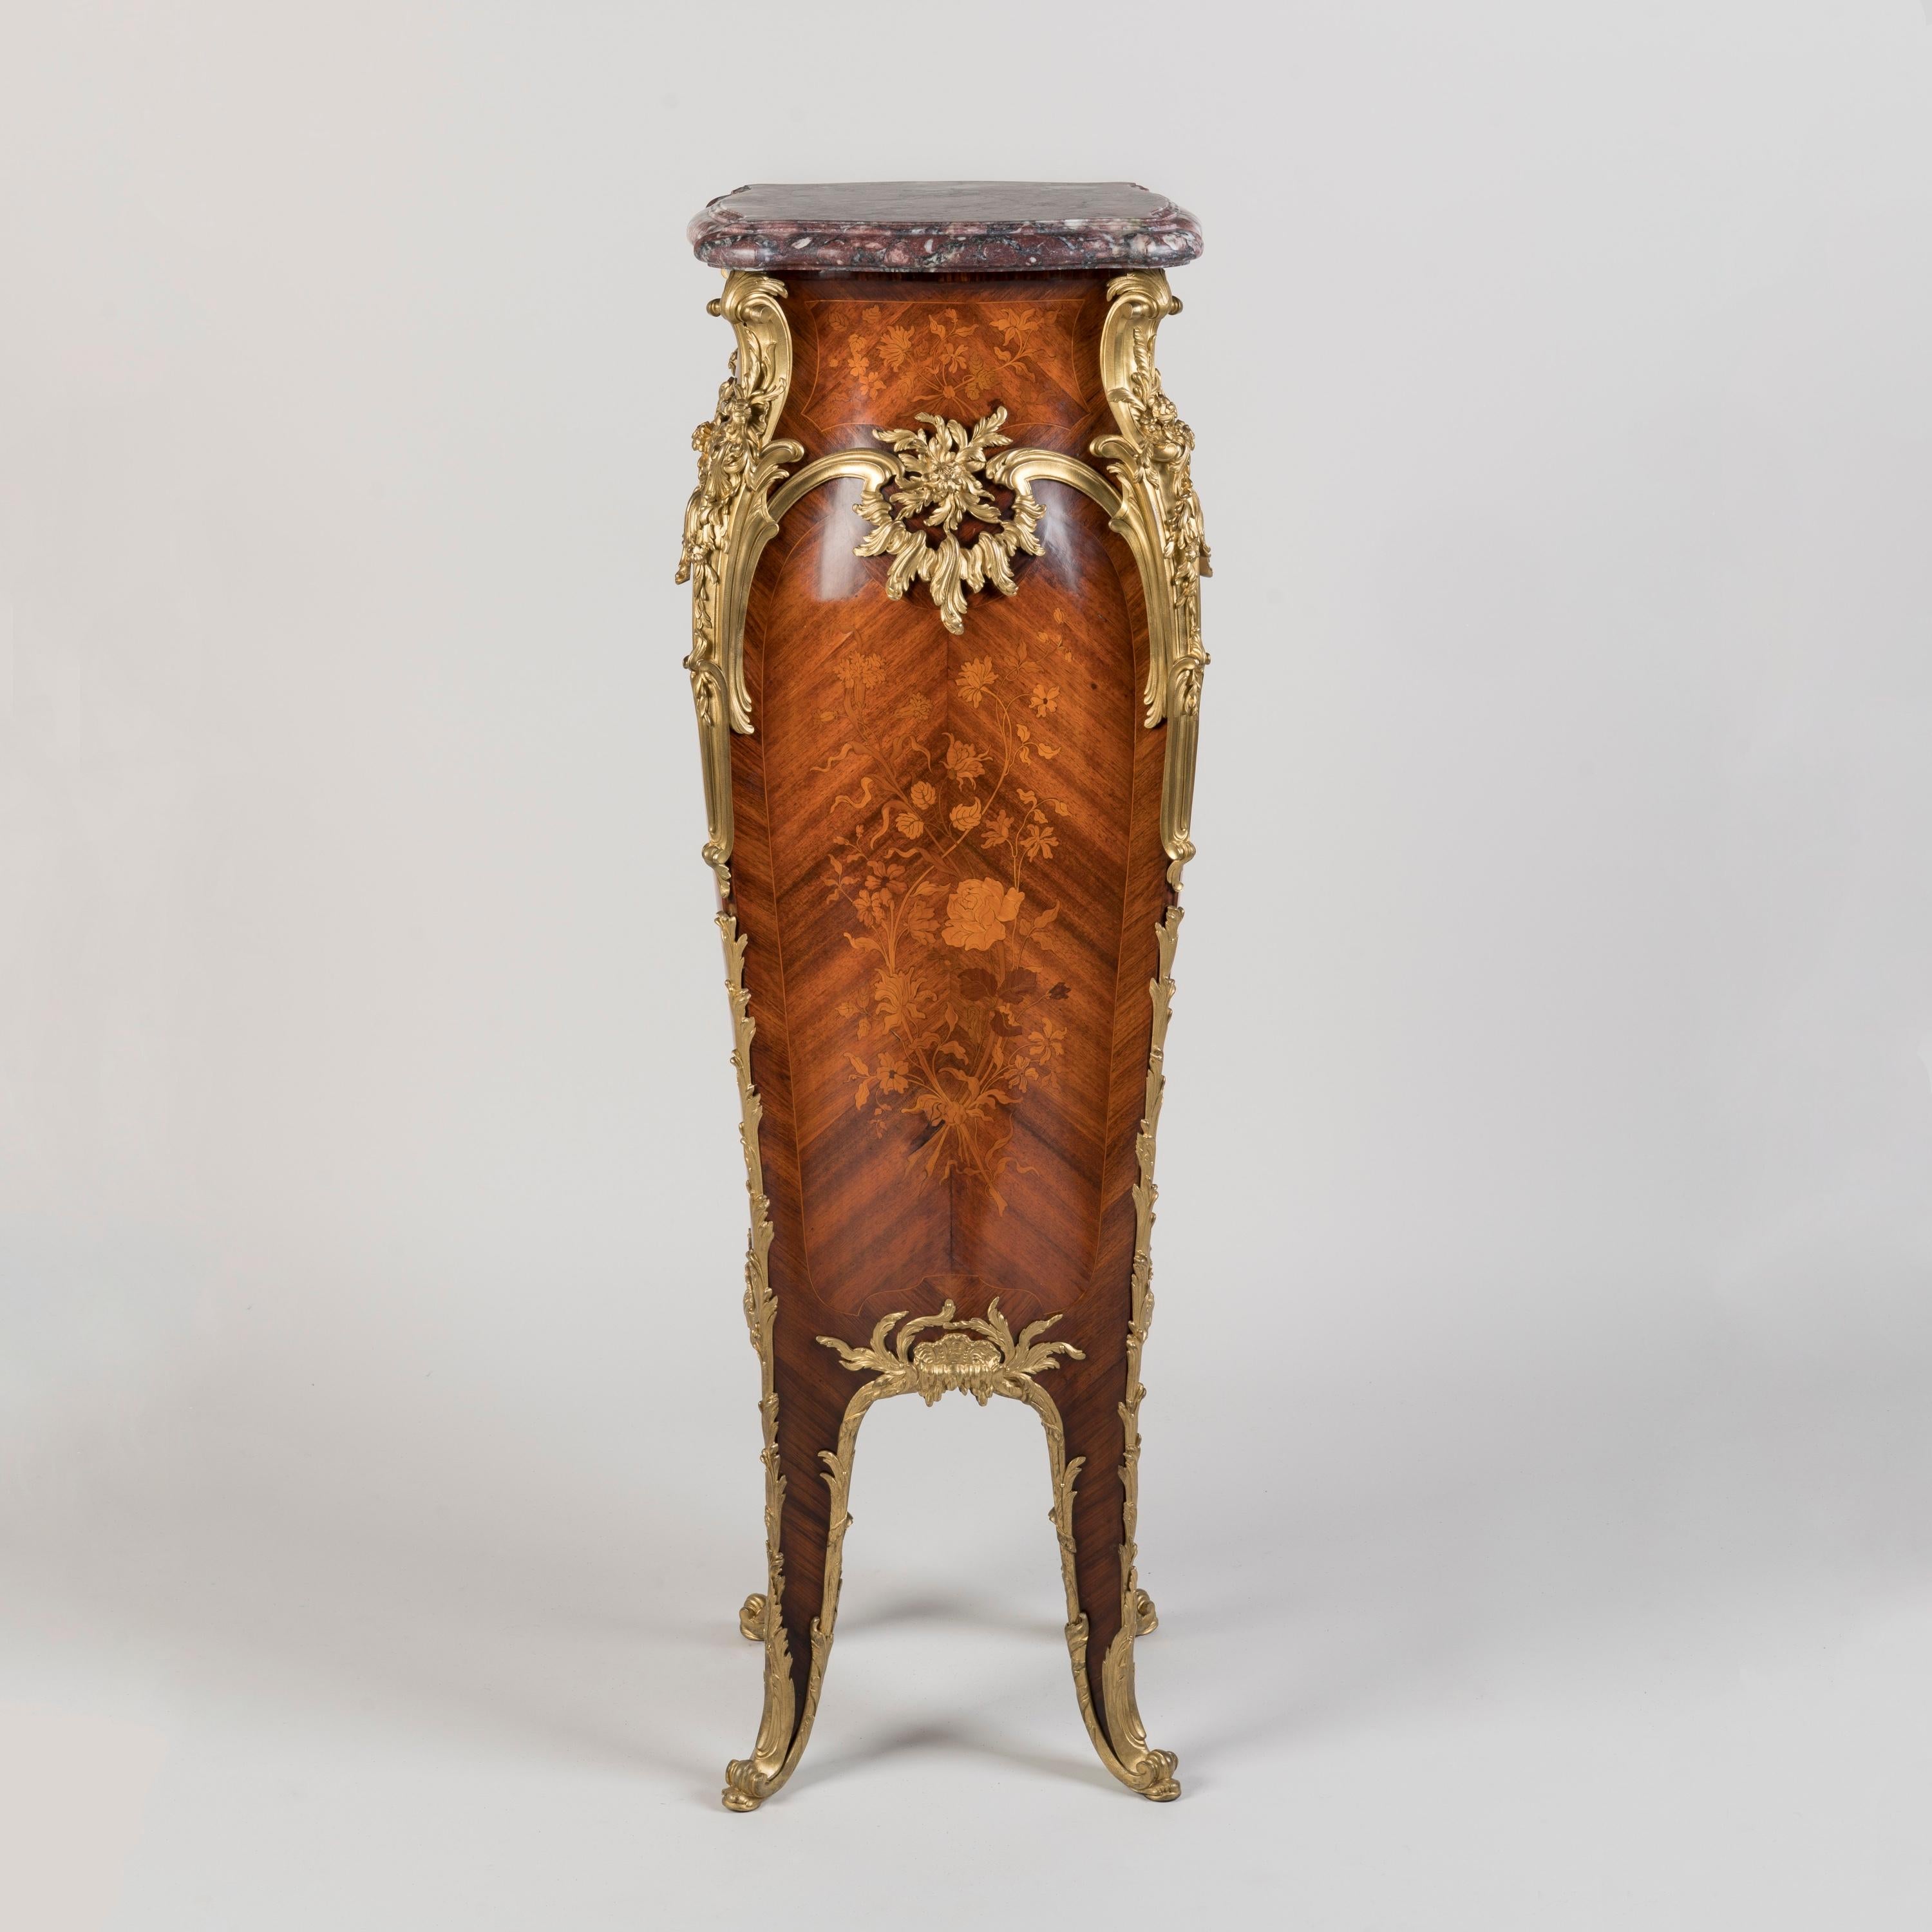 A Marquetry-Inlaid Pedestal in the Louis XV Style
Index no. 184

Of elegant bombé form with bookmatched kingwood crossbanding and floral marquetry to all sides on a bois satiné ground, the corners dressed with foliate scrolling ormolu mounts